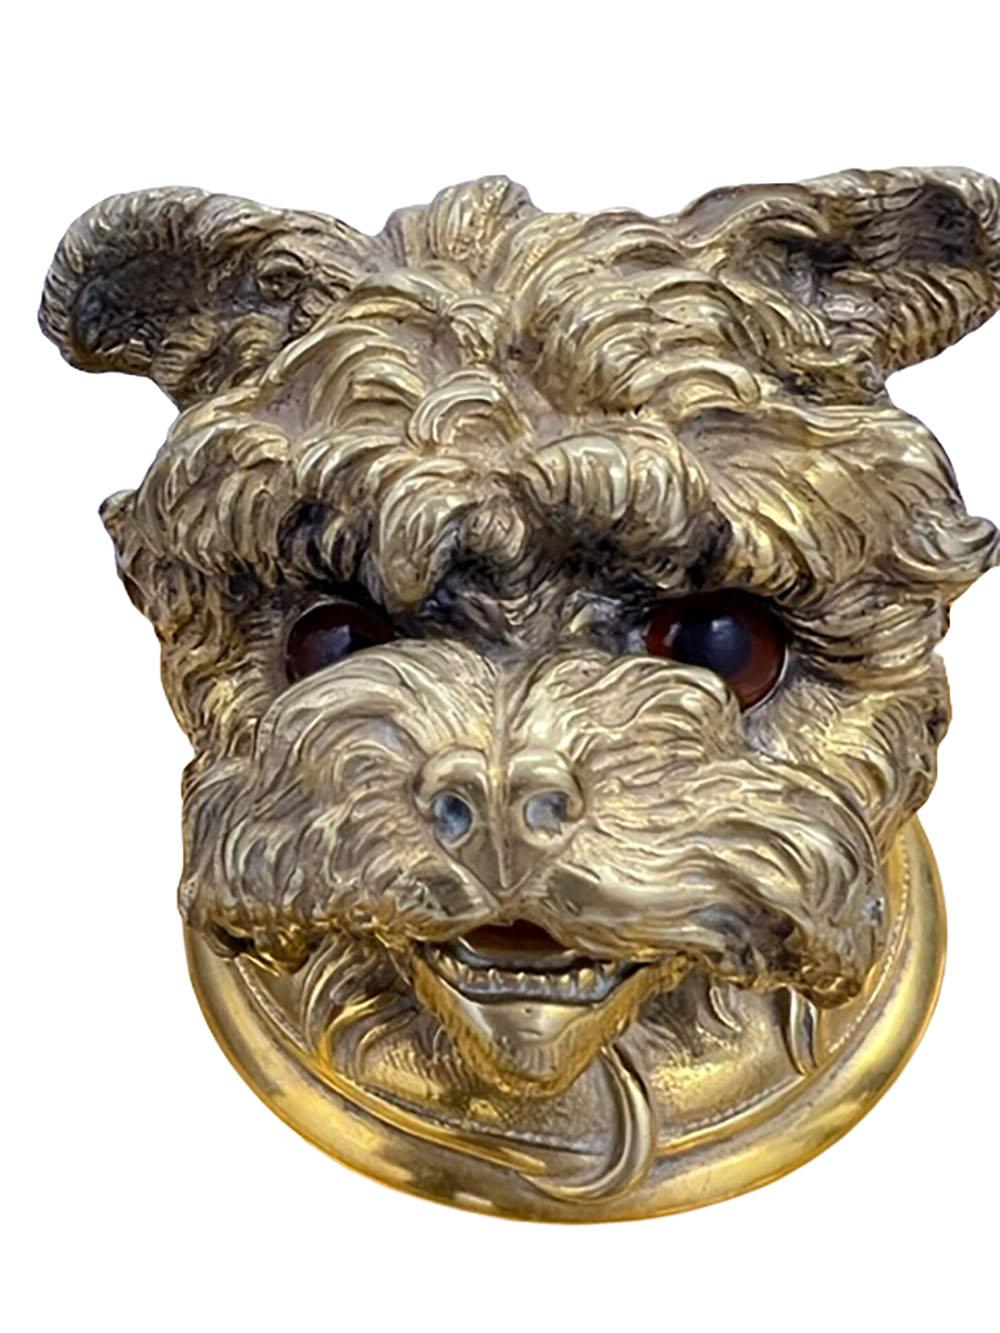 A round bronze doré dog inkwell with a hinged top and brown glass eyes. Circa 1900, England.